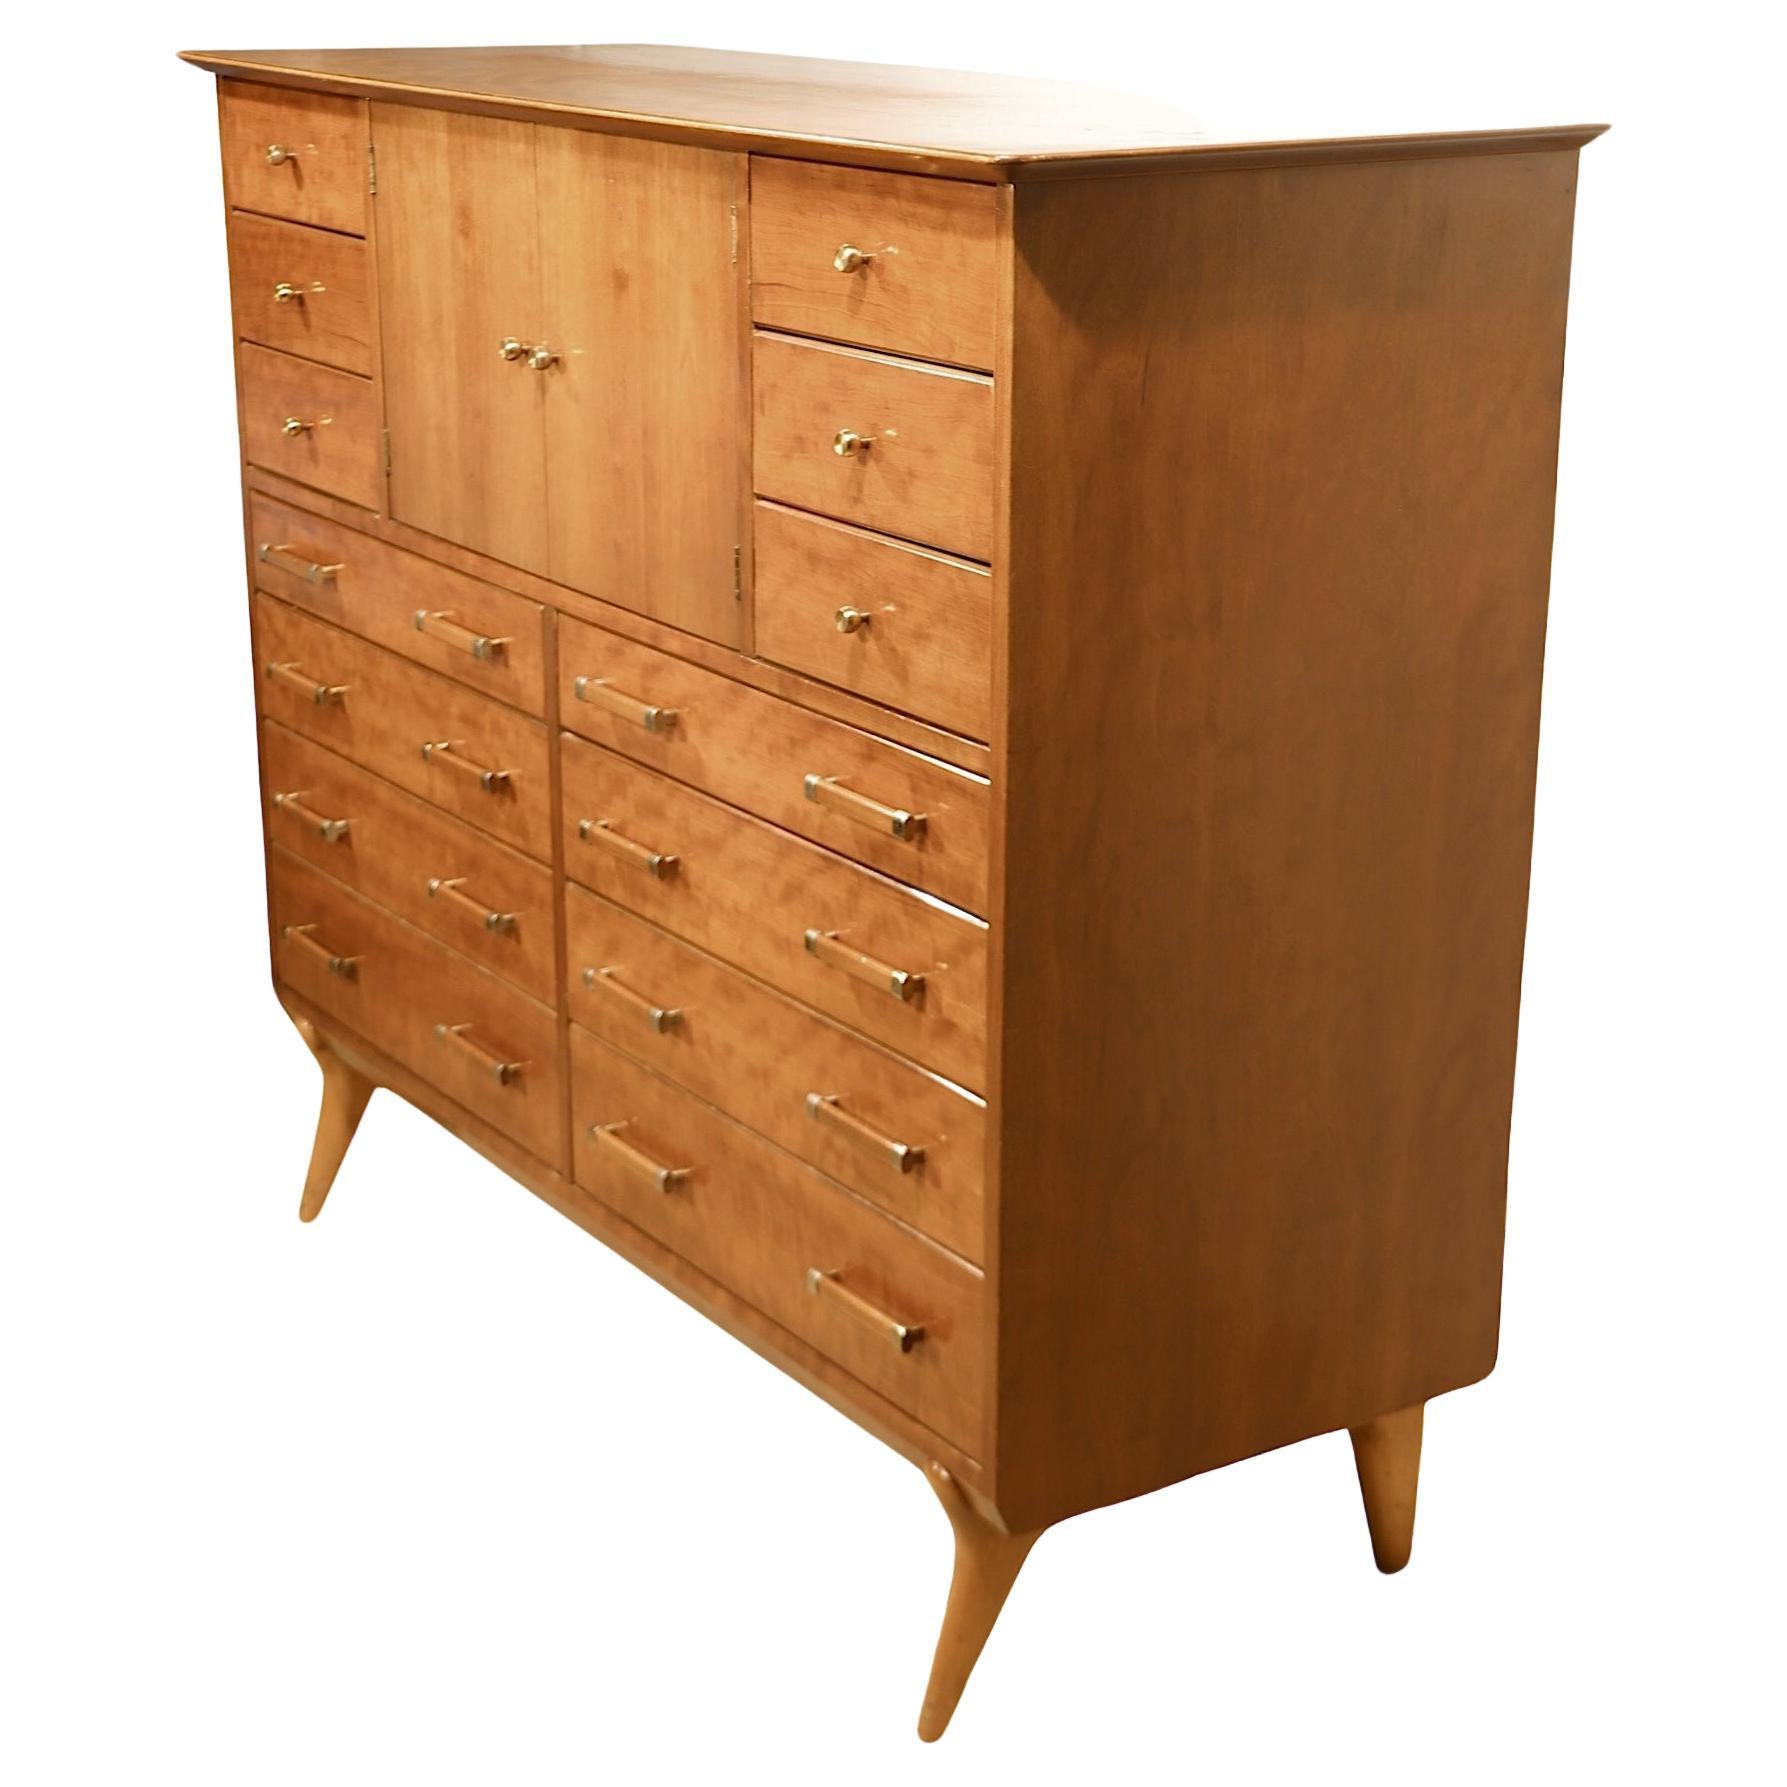  Johnson Furniture Company Commodes and Chests of Drawers